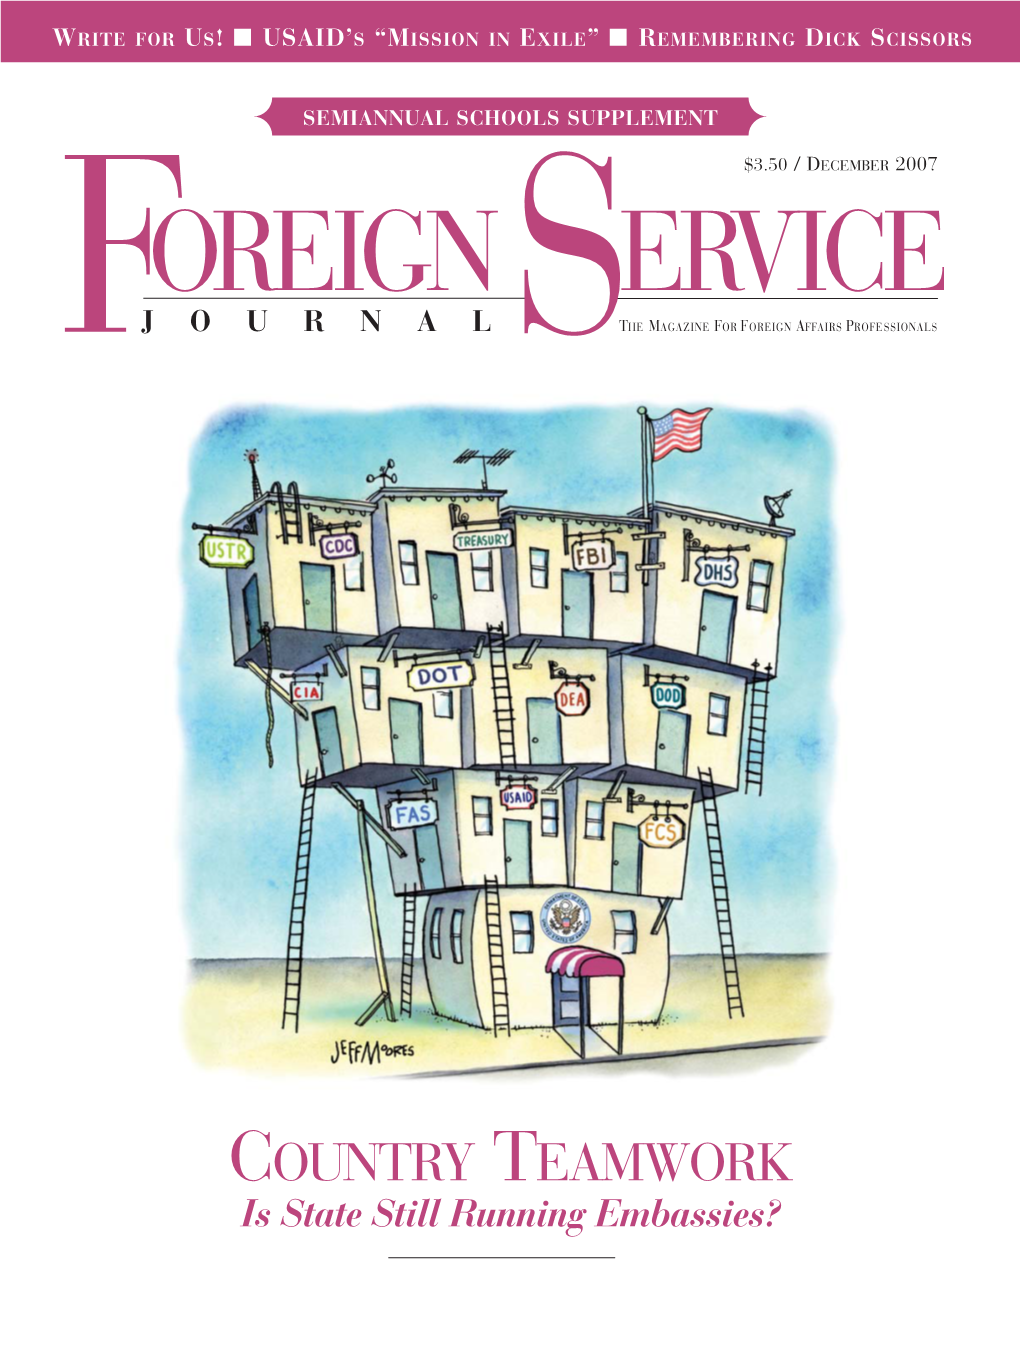 The Foreign Service Journal, December 2007